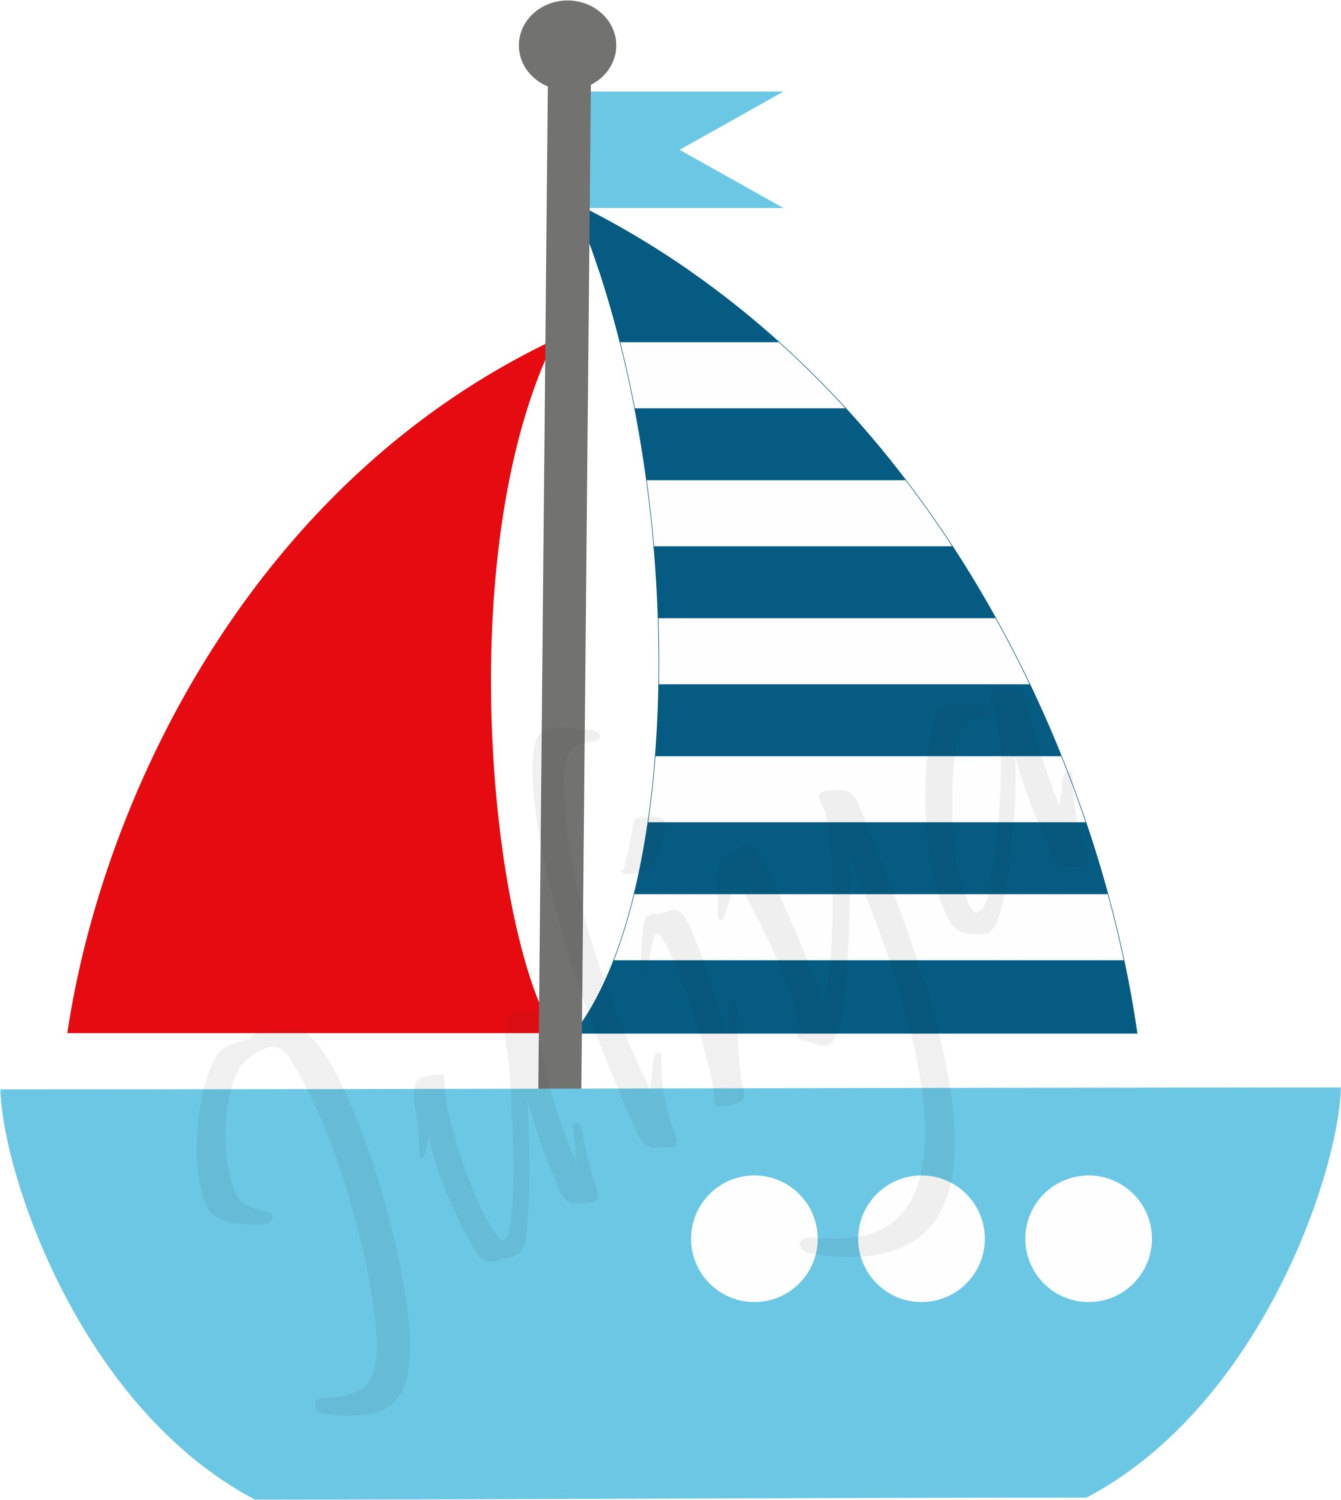 Sailboat clipart red and blue pencil in color sailboat